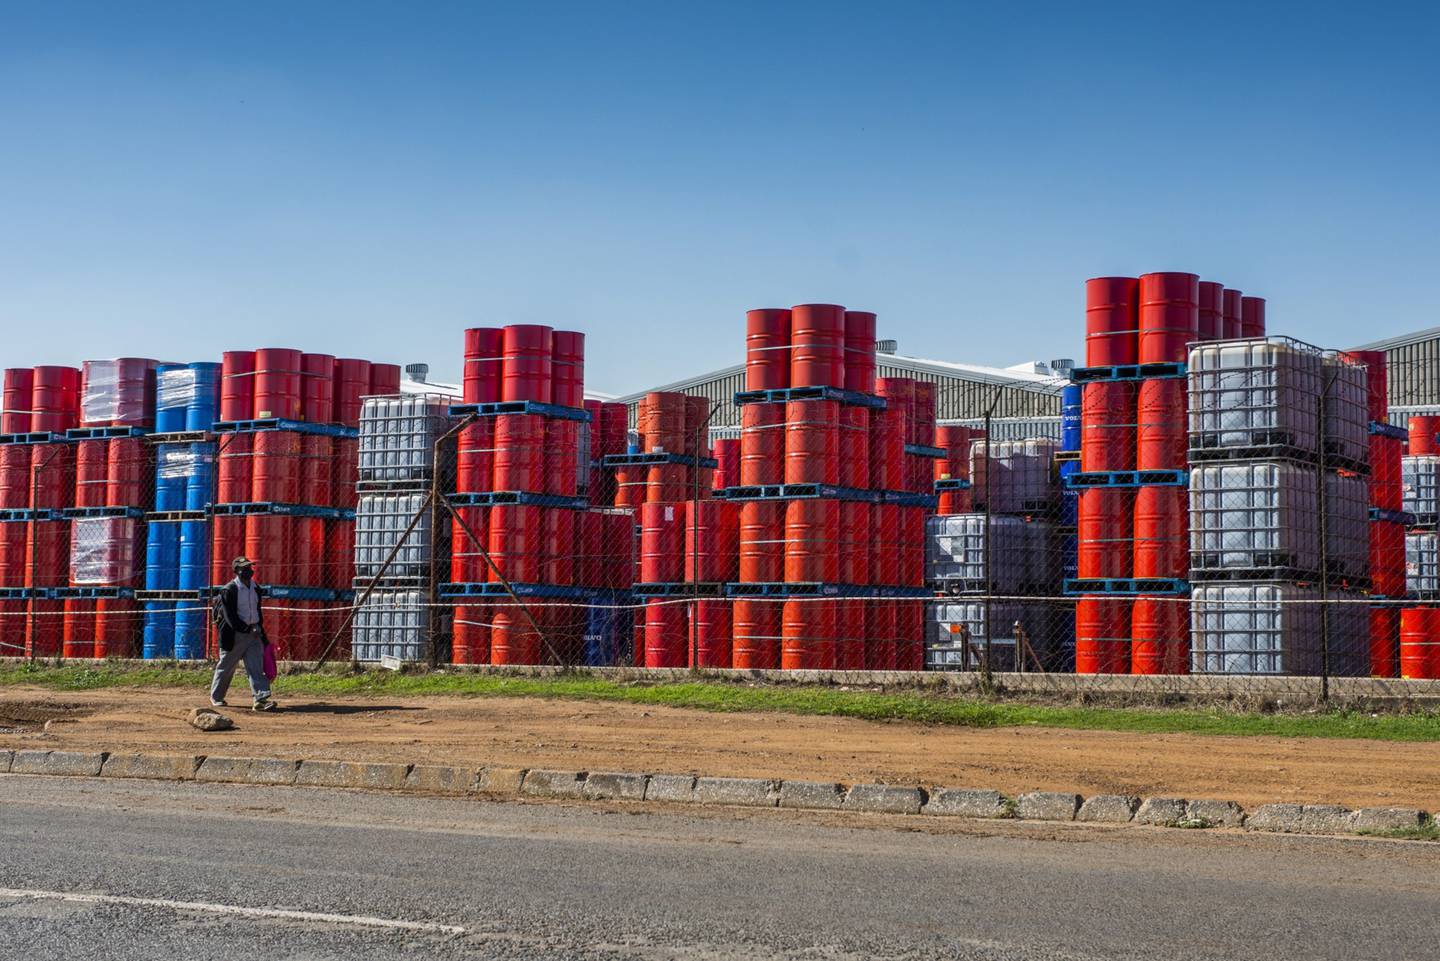 A pedestrian wearing a protective face mask walks by oil barrels stacked beyond security fencing at a facility in the Alrode district of Johannesburg, South Africa, on Tuesday, April 21, 2020. The oil meltdown accelerated, with huge losses sweeping through markets as the world runs out of places to store unwanted crude and grapples with negative pricing. Photographer: Waldo Swiegers/Bloomberg